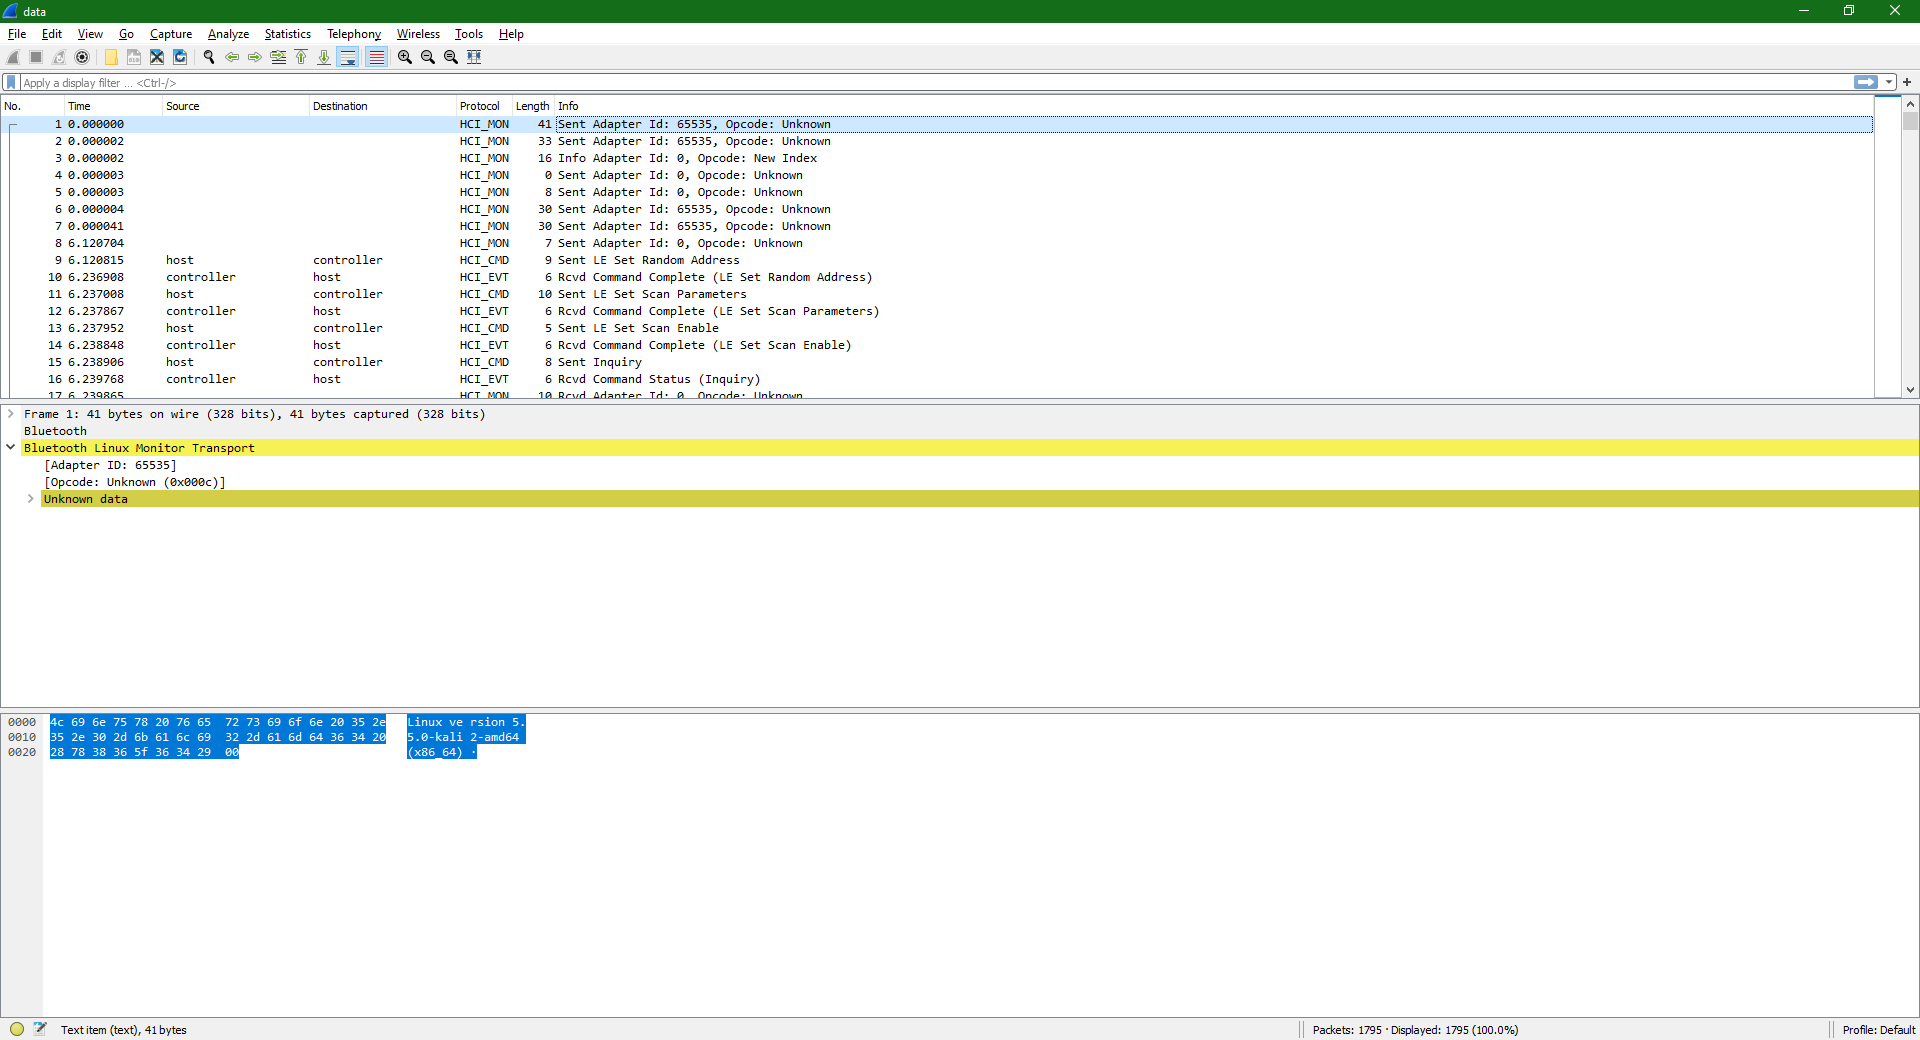 View of the log in Wireshark